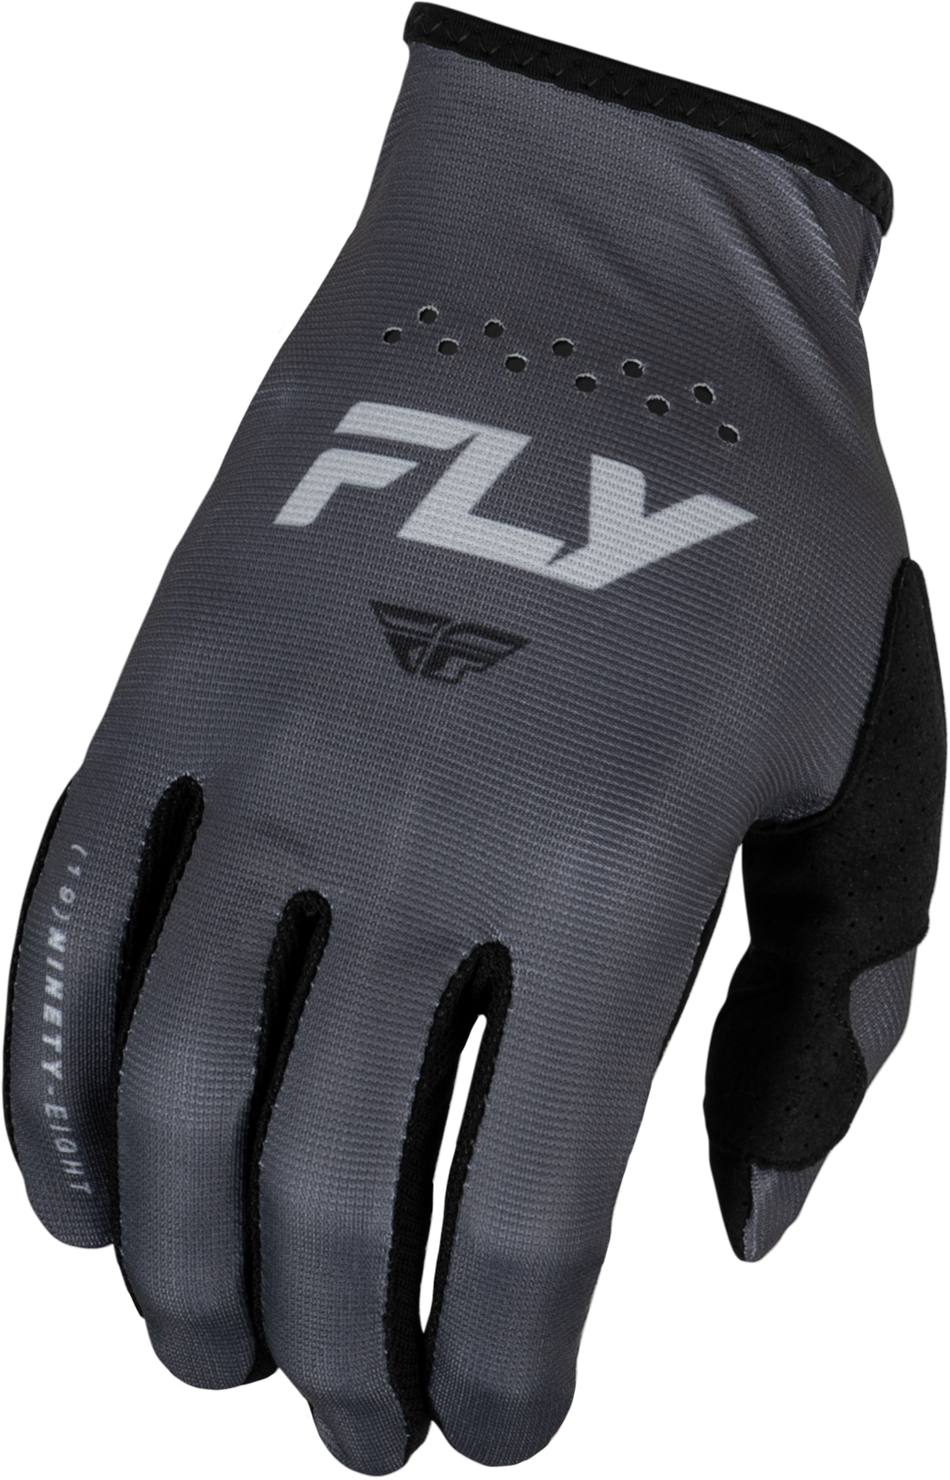 FLY RACING Lite Gloves Charcoal/Black Sm 377-711S